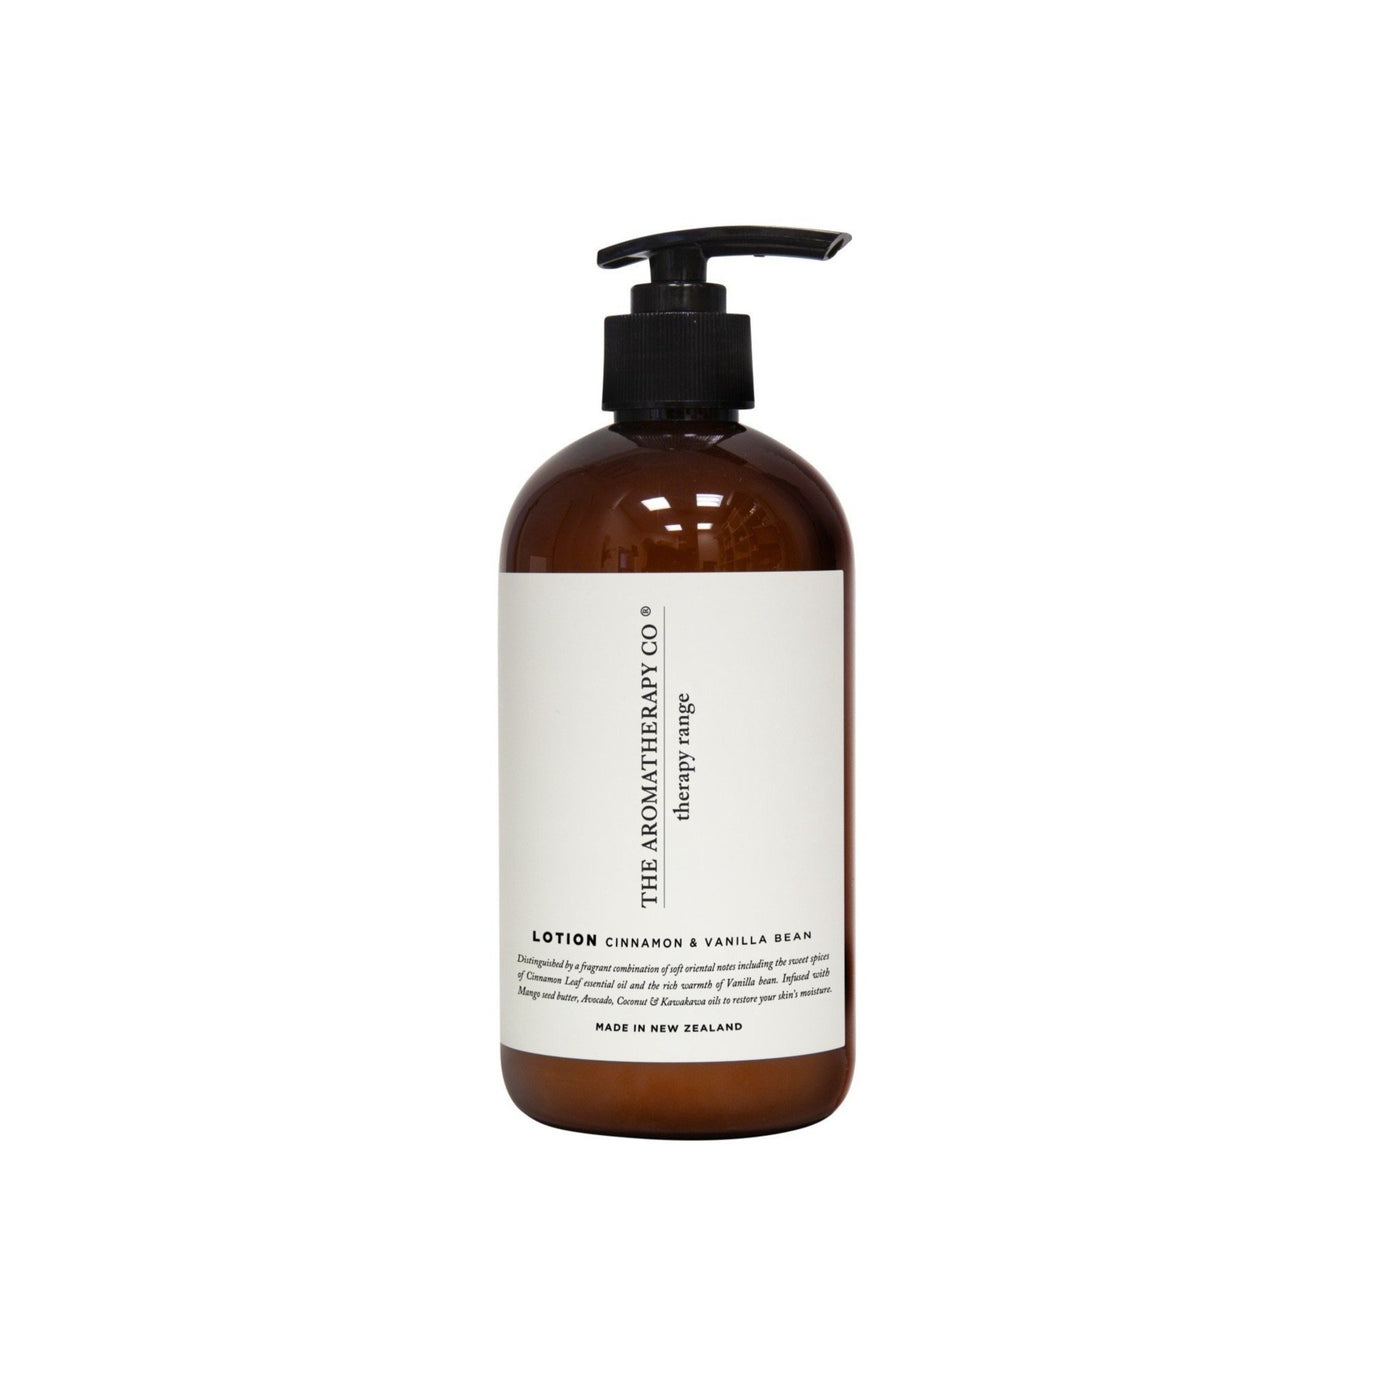 The Aromatherapy Co. Therapy Hand and Body Lotion - 500ml Cinnamon & Vanilla Bean